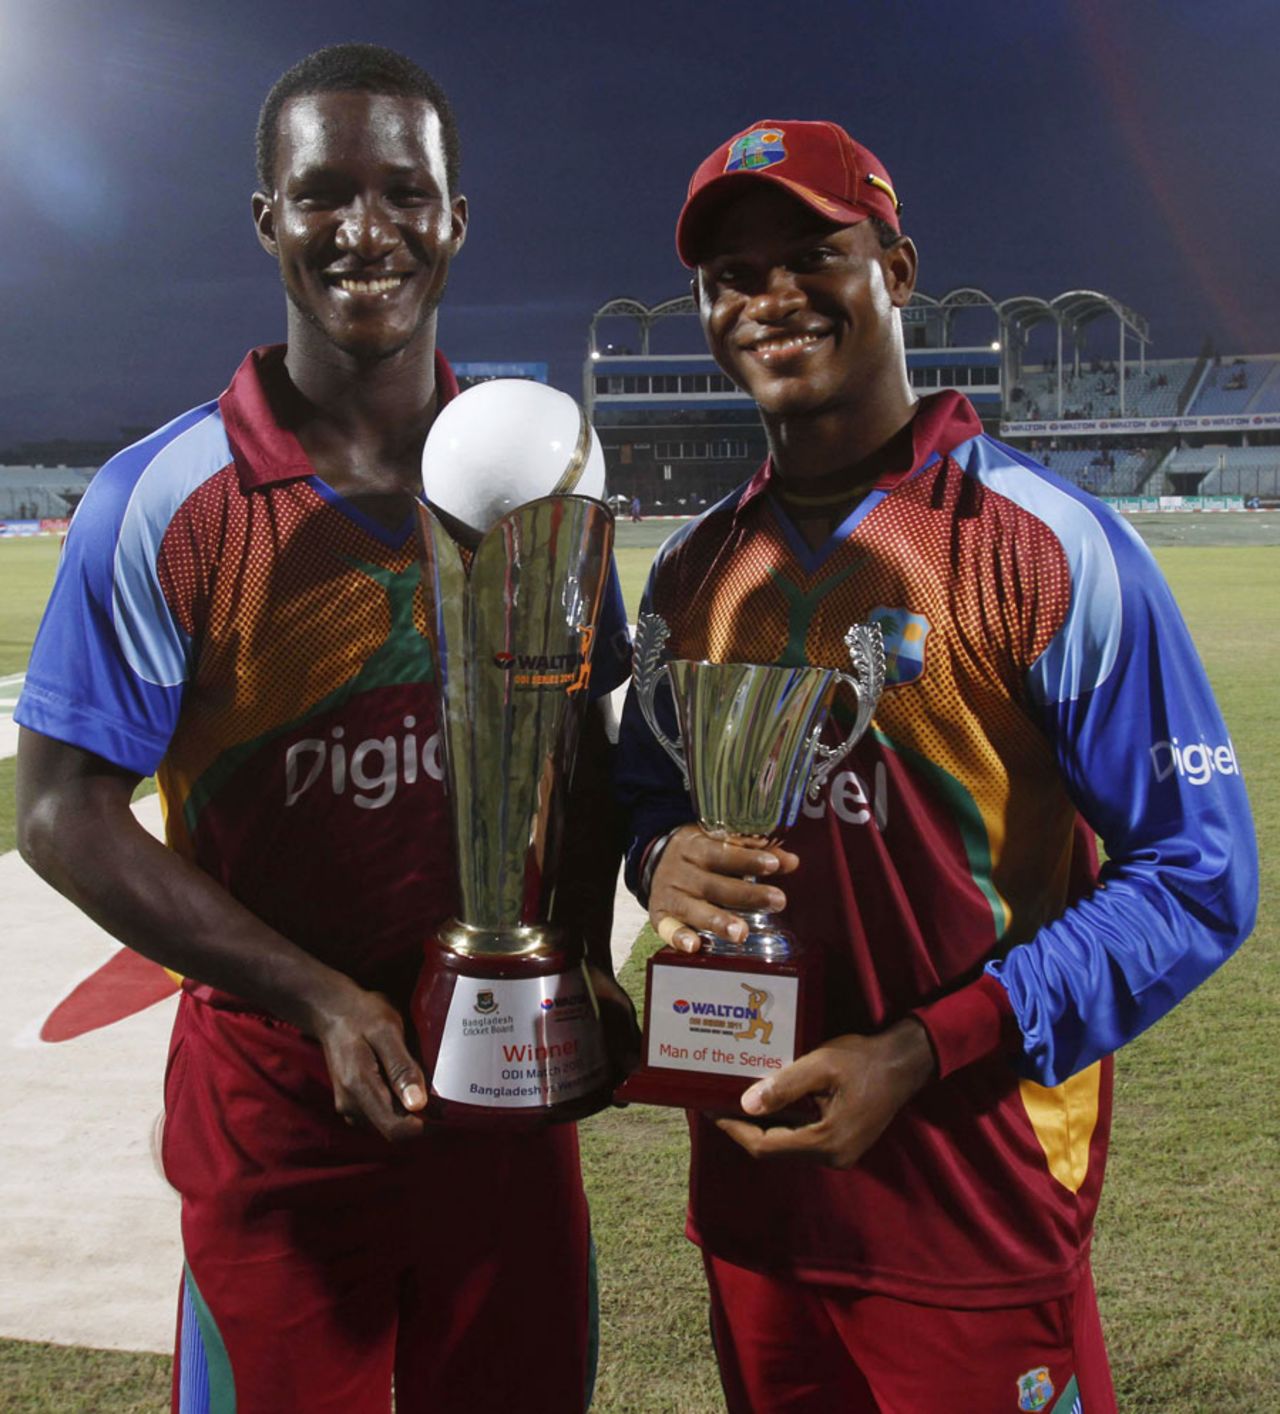 Player-of-the-Series Marlon Samuels with Darren Sammy and the winners' trophy, Bangladesh v West Indies, 3rd ODI, Chittagong, October 18, 2011